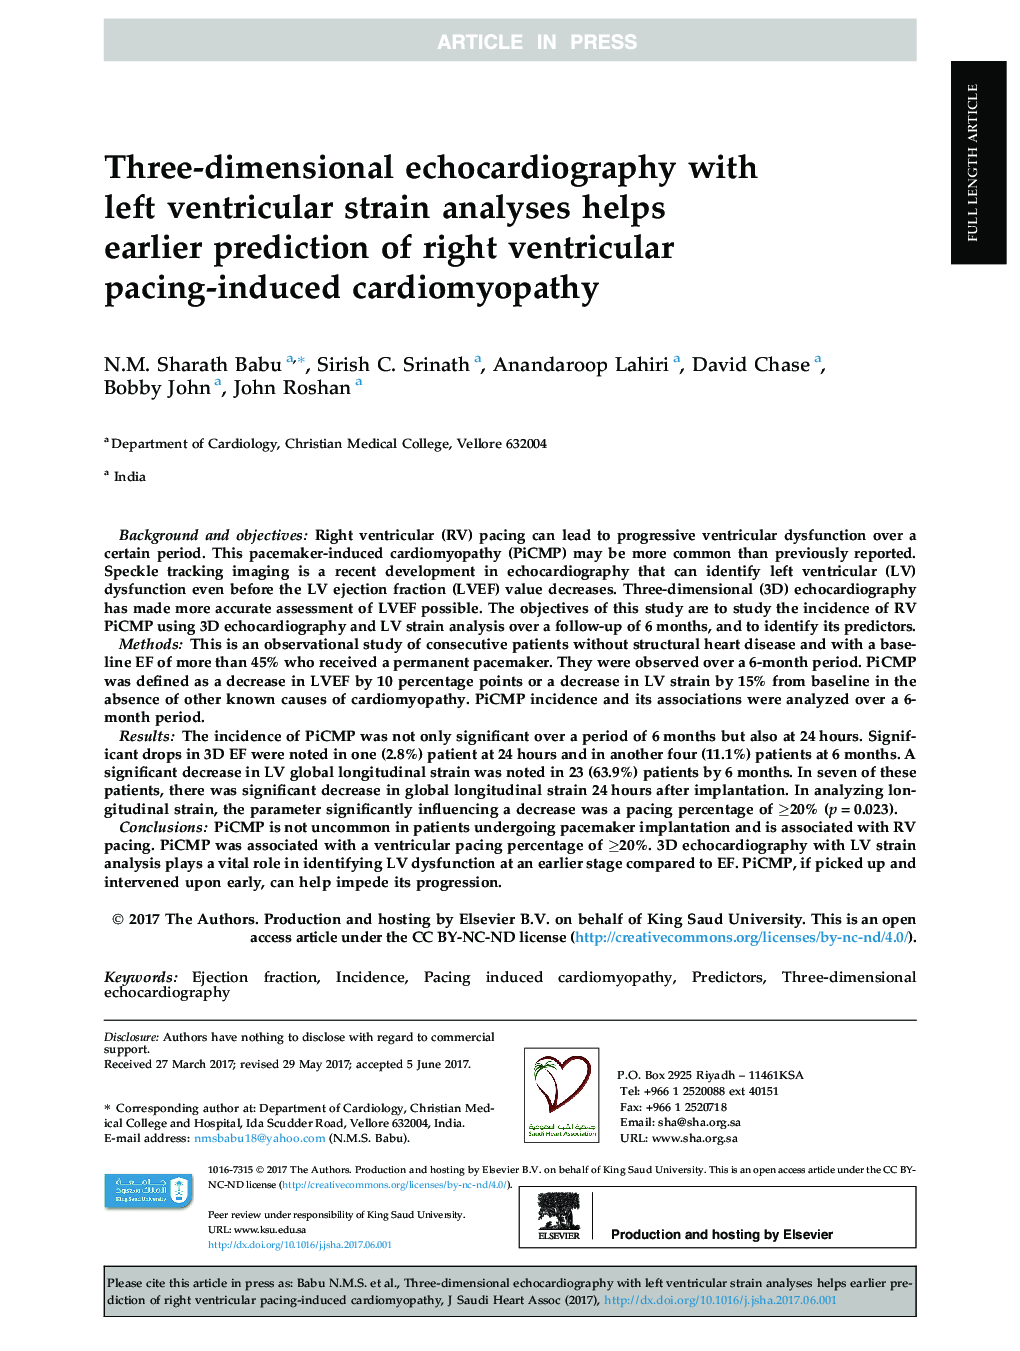 Three-dimensional echocardiography with left ventricular strain analyses helps earlier prediction of right ventricular pacing-induced cardiomyopathy